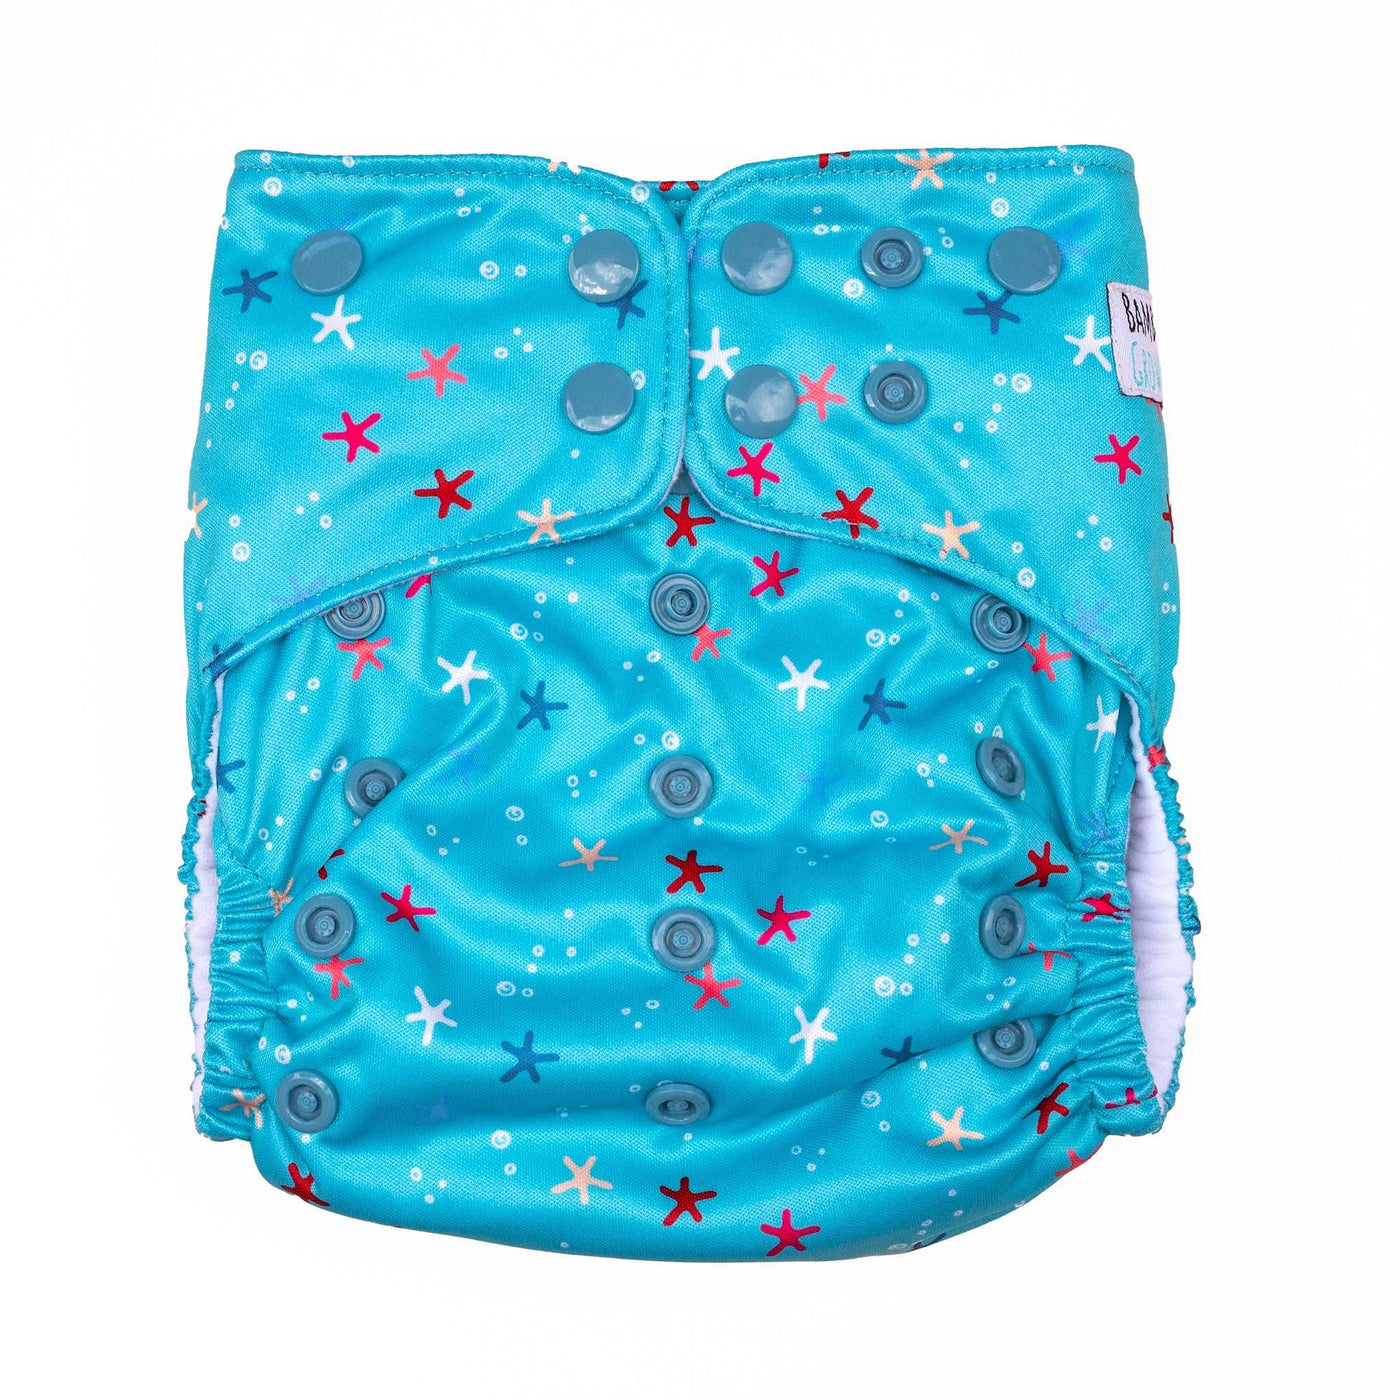 Nappy Bundle "Turquoise" - 6 Nappies and Wet Bag Set